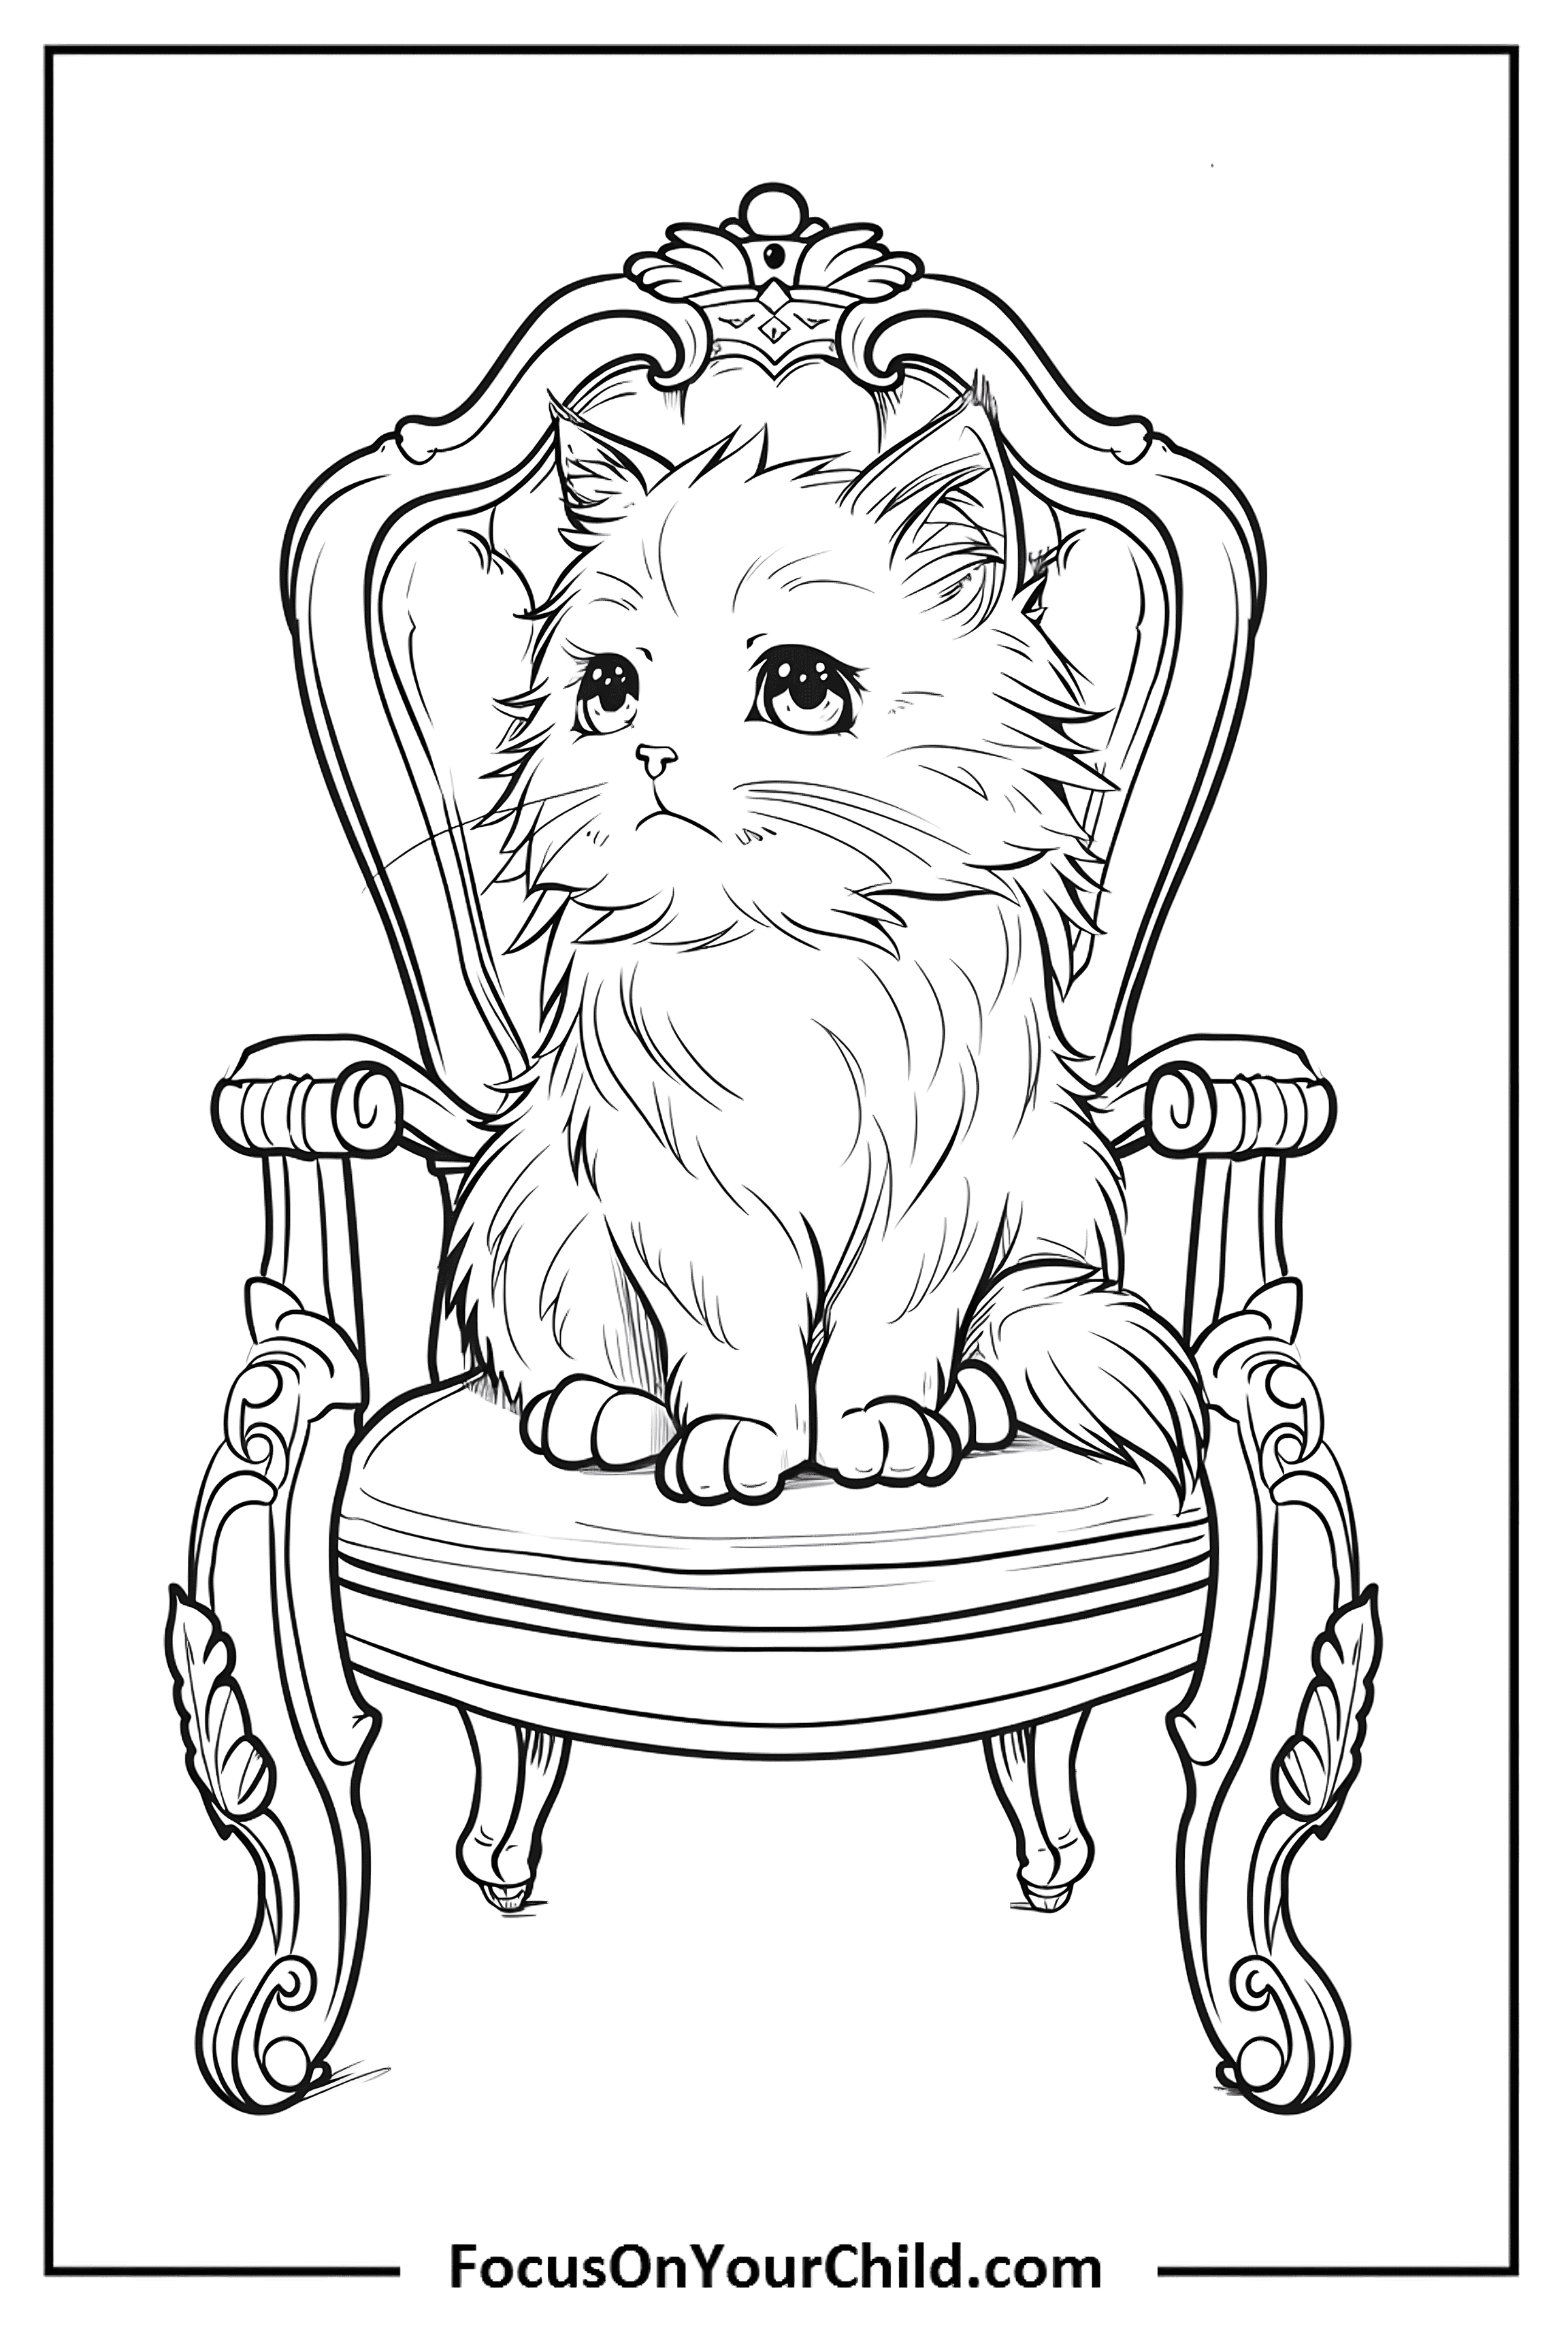 Majestic cat sitting on ornate chair, elegant black-and-white line drawing for coloring.